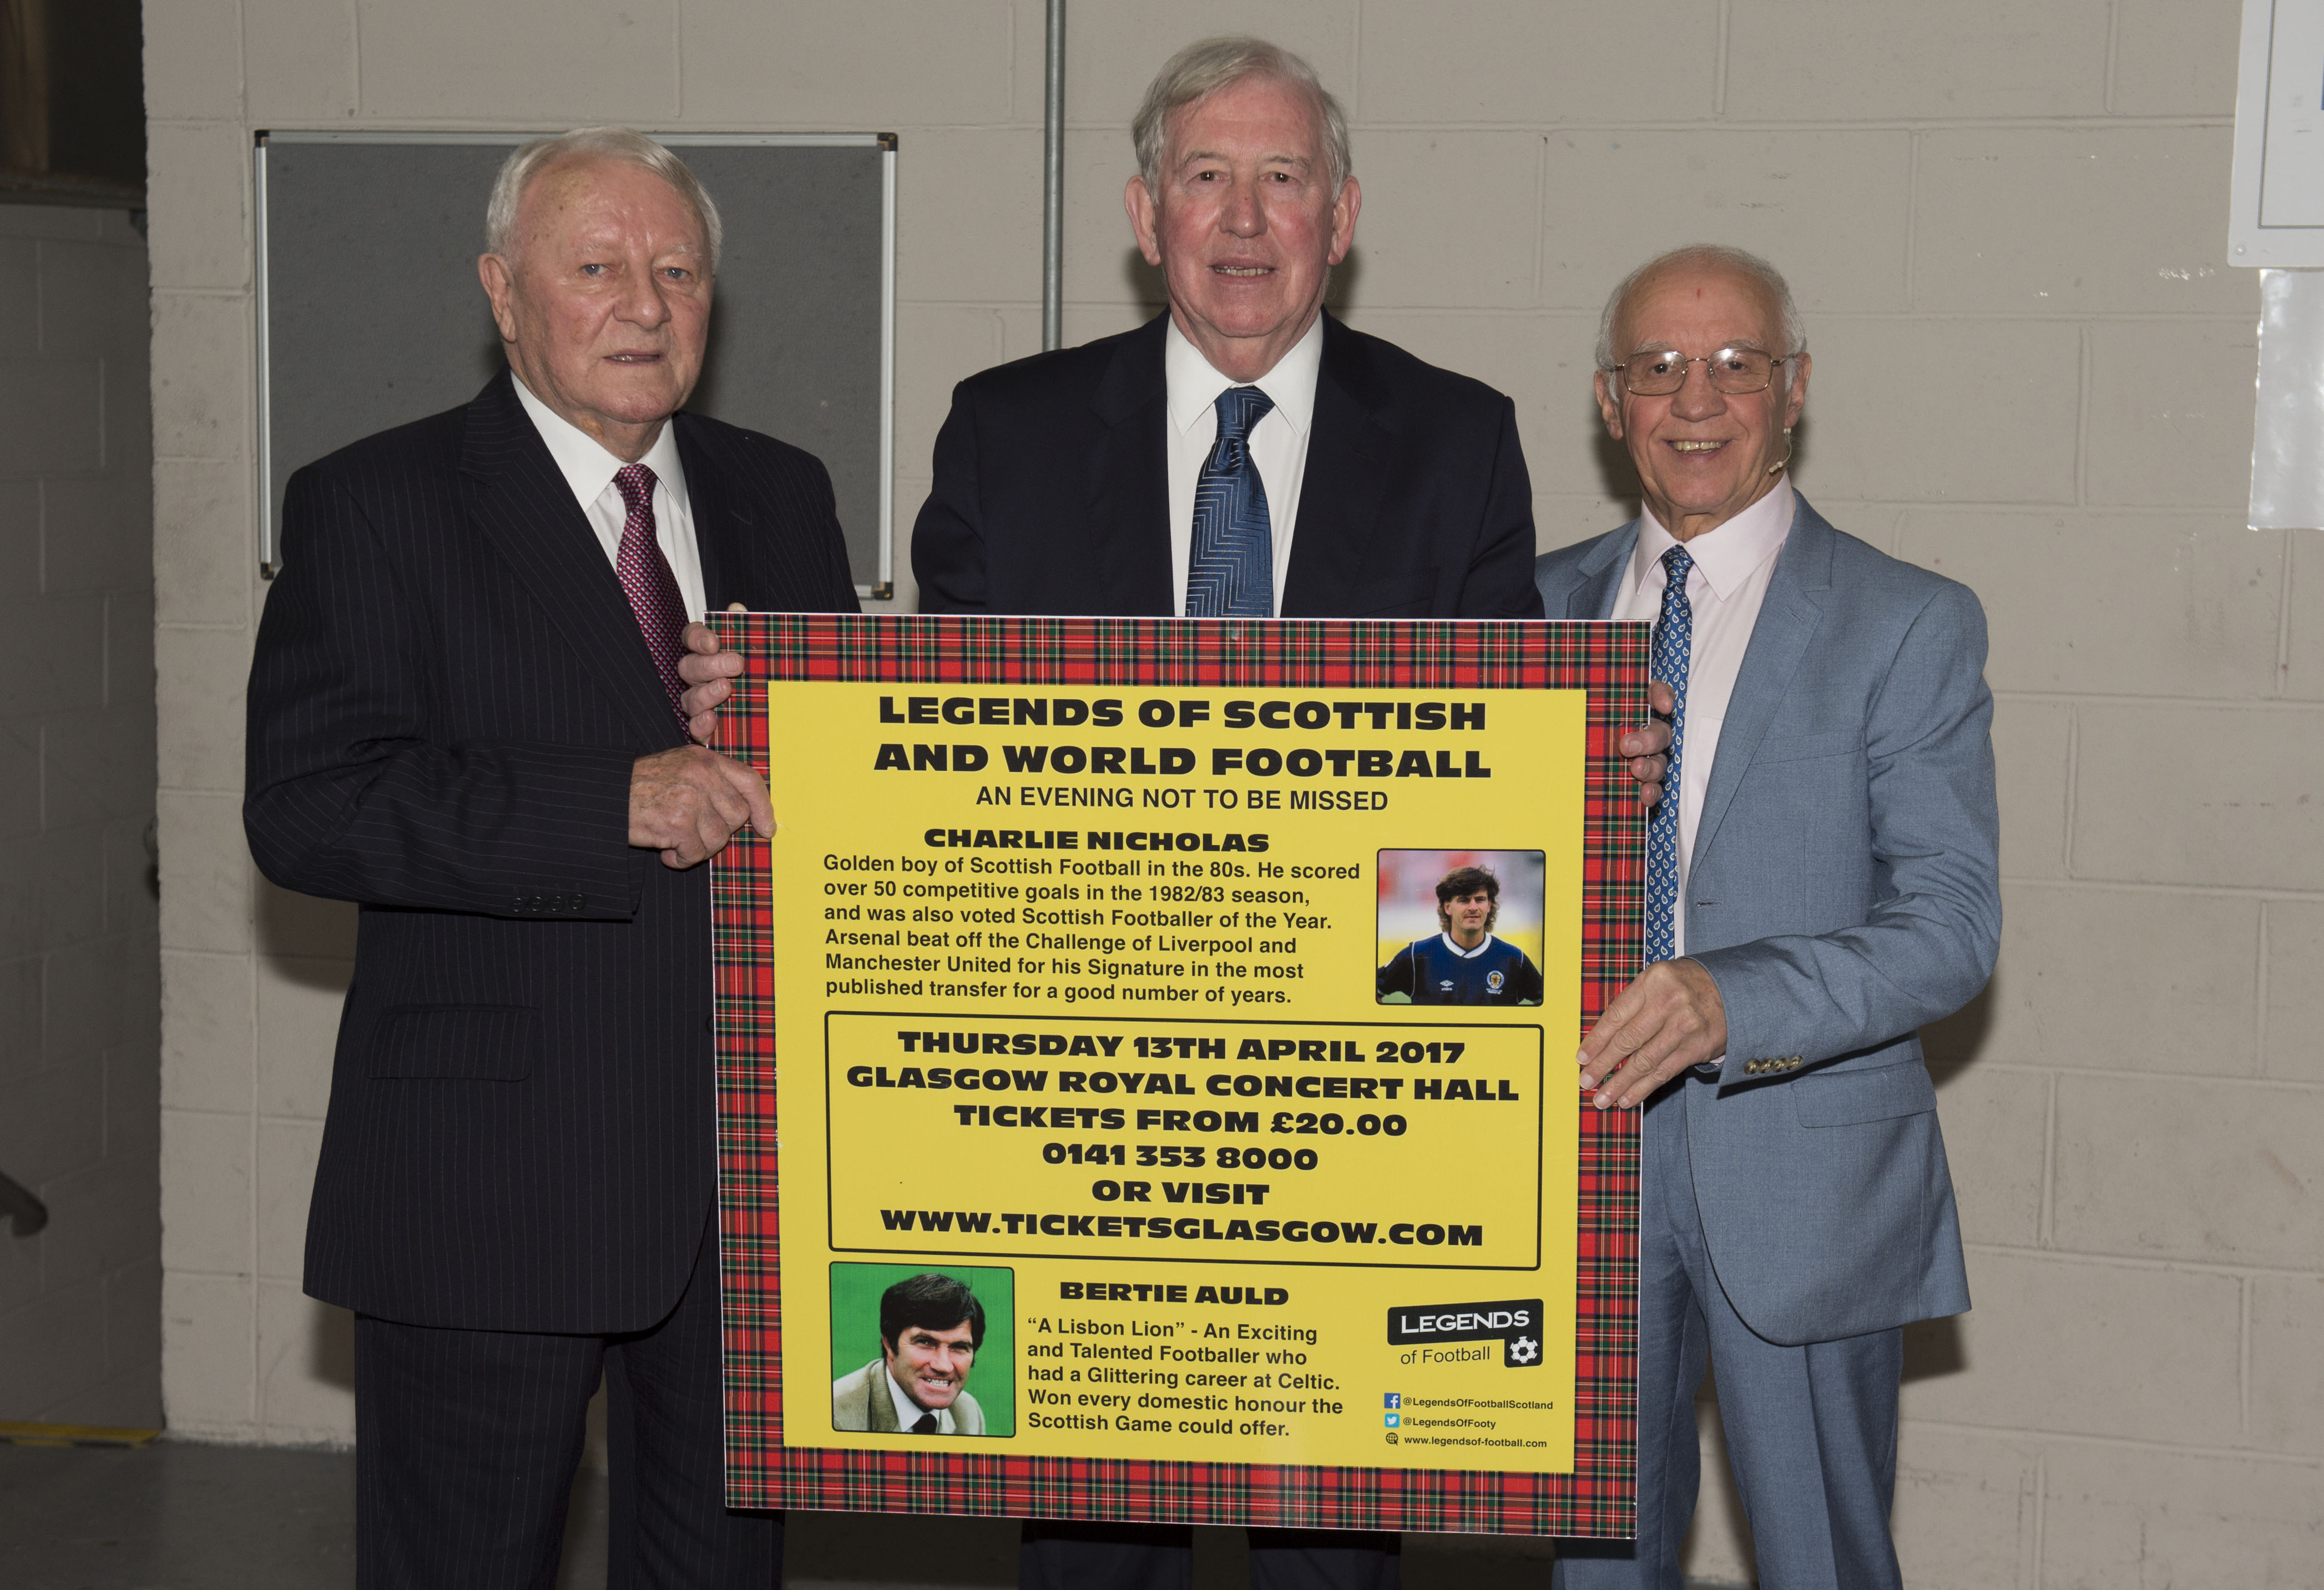 07/01/17 ARMADILLO - GLASGOW Tommy Docherty (left), John Greig (centre) and Willie Henderson helps to promote a Legends of Scottish and World Football event with Charlie Nicholas and Bertie Auld